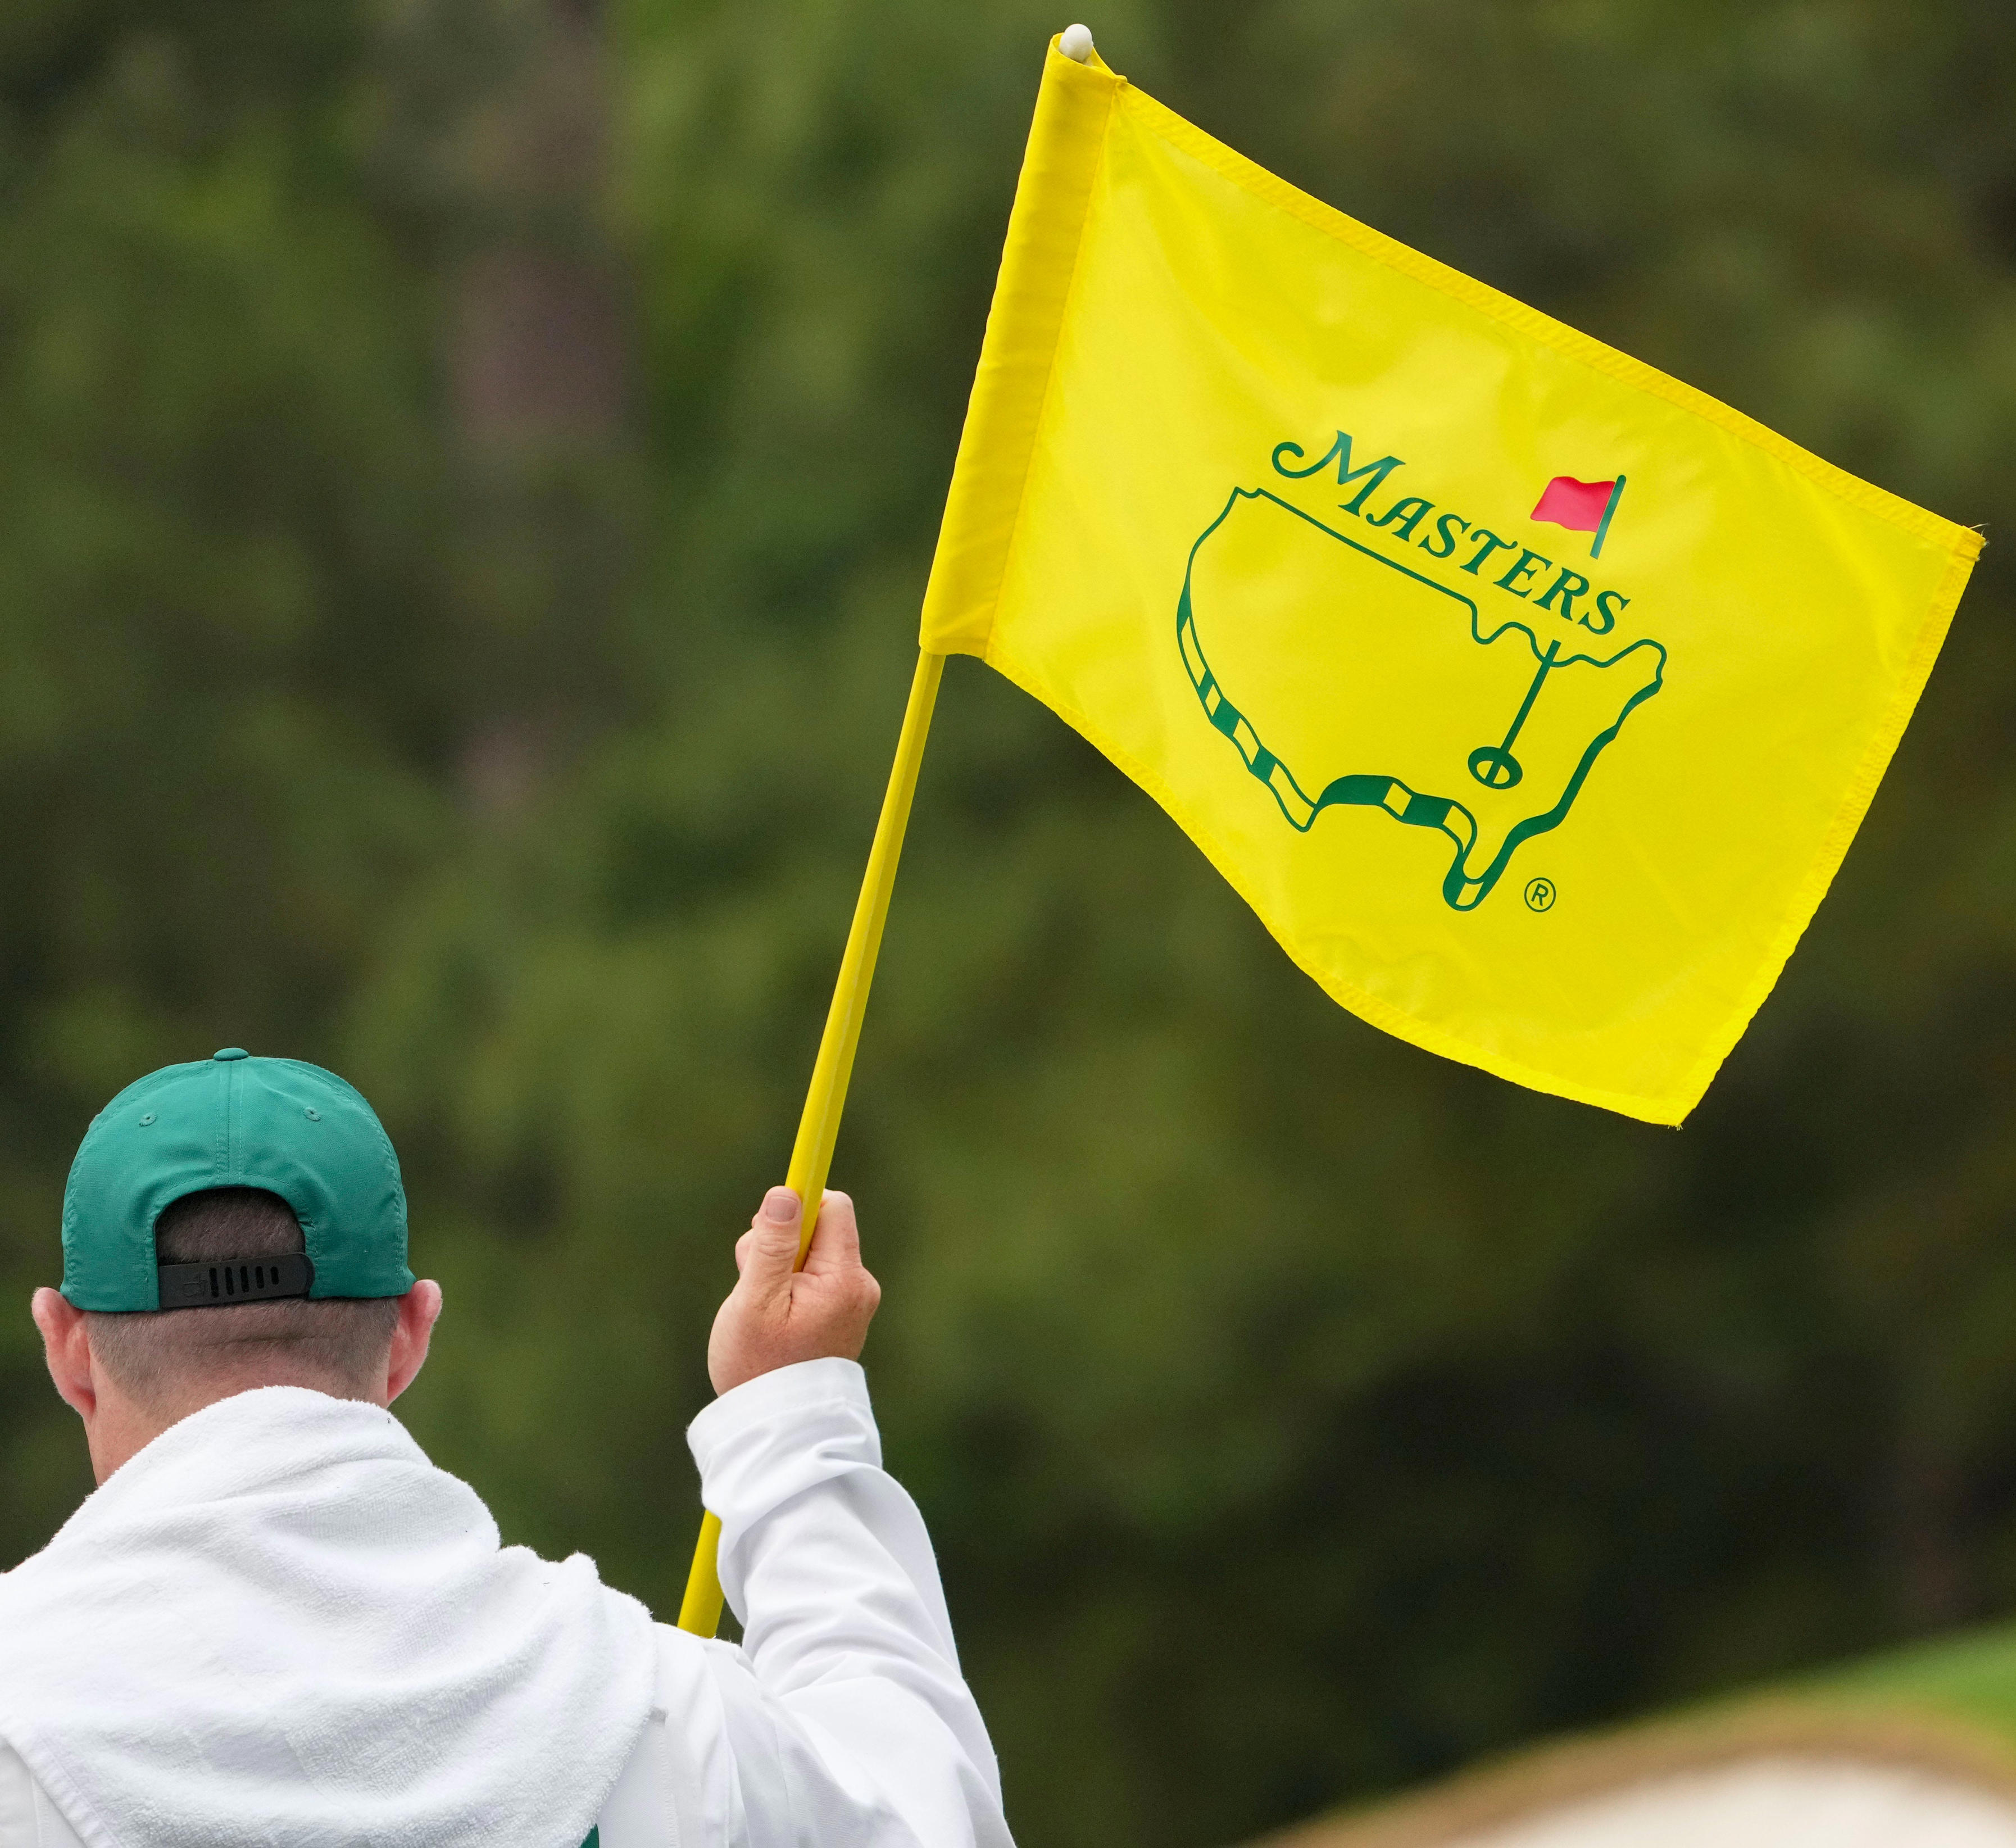 tiger woods live: updates, score and tracker for golf icon at augusta on day 1 thursday